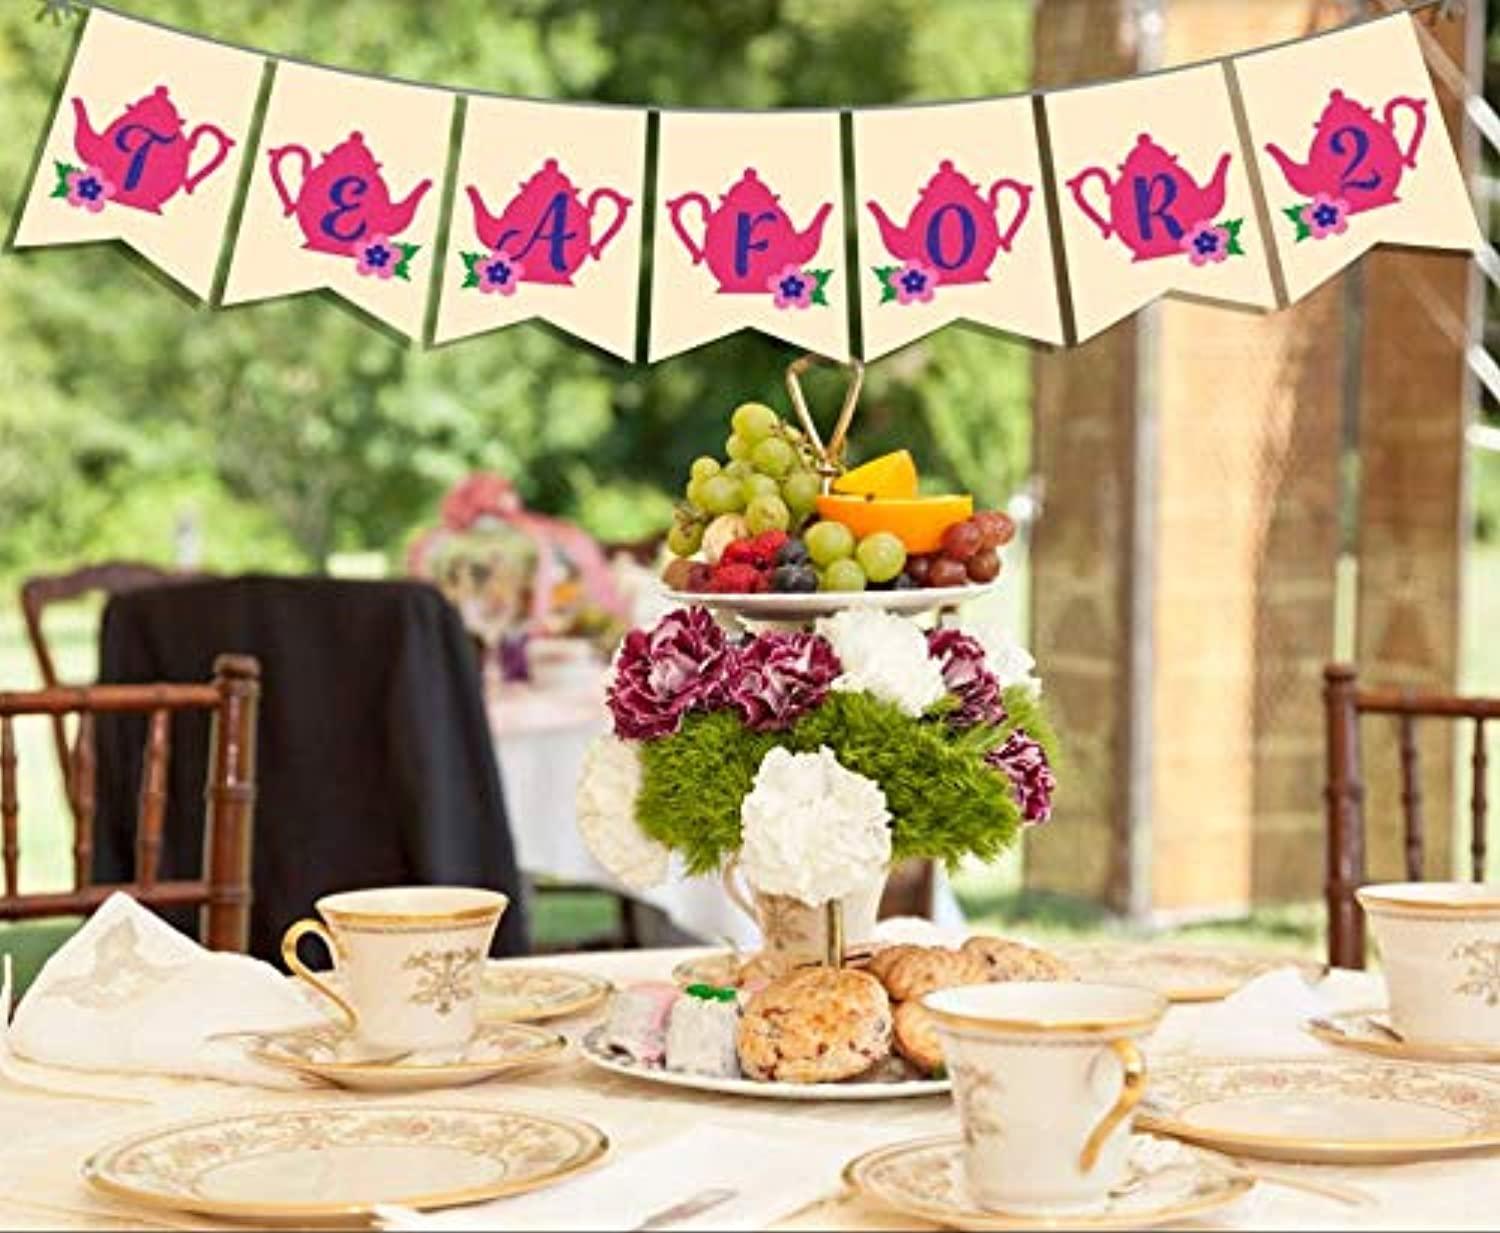 Ideas from Boston-Tea party Banner decoration, Tea for 2 banner, Tea party  supplies, Engagement Decor